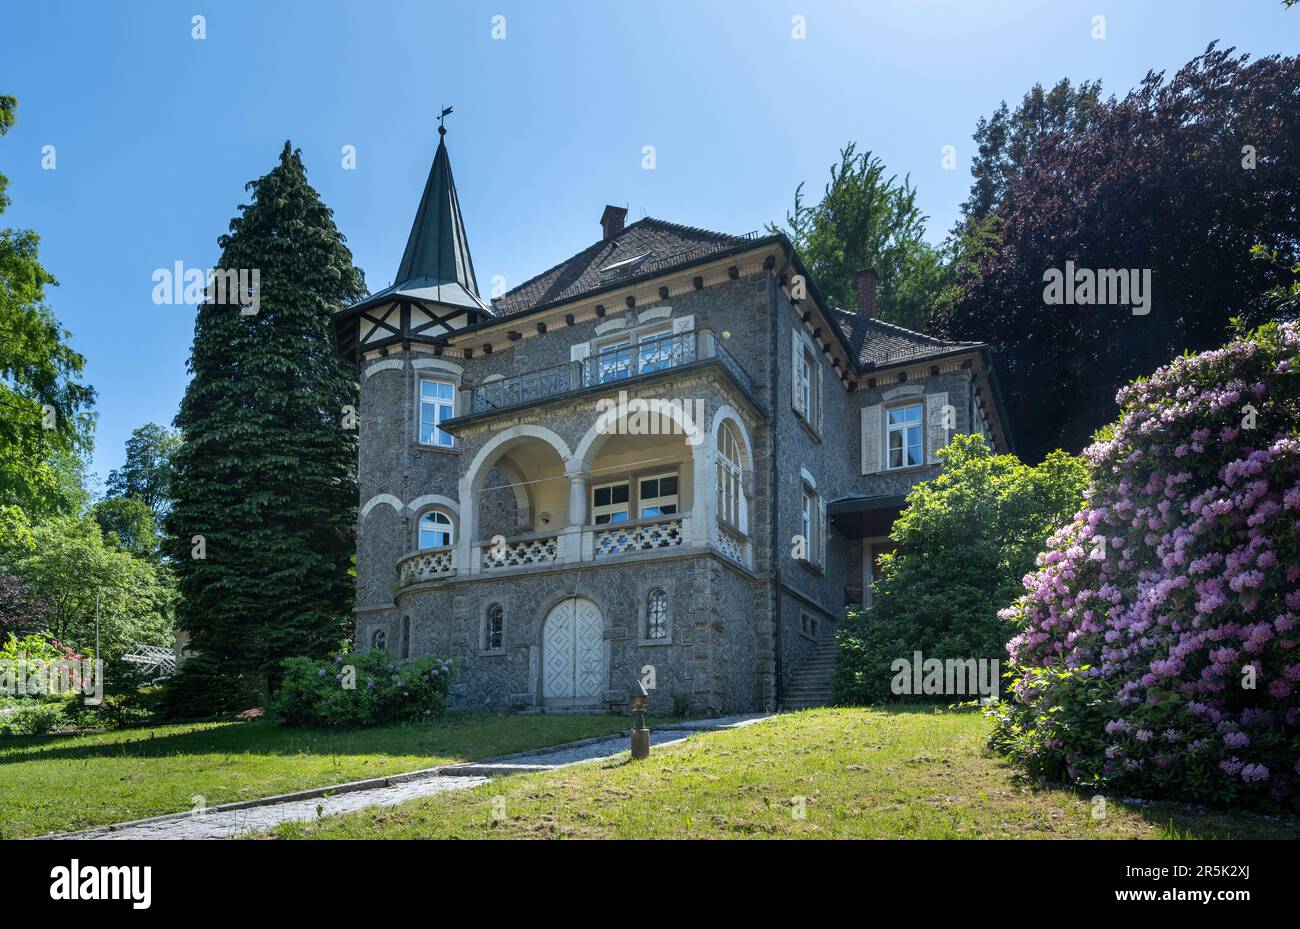 Idyllic restaurant and castle Zuckerbergschloss, Kappelrodeck, Germany at the foothills of the Northern Black Forest. Stock Photo